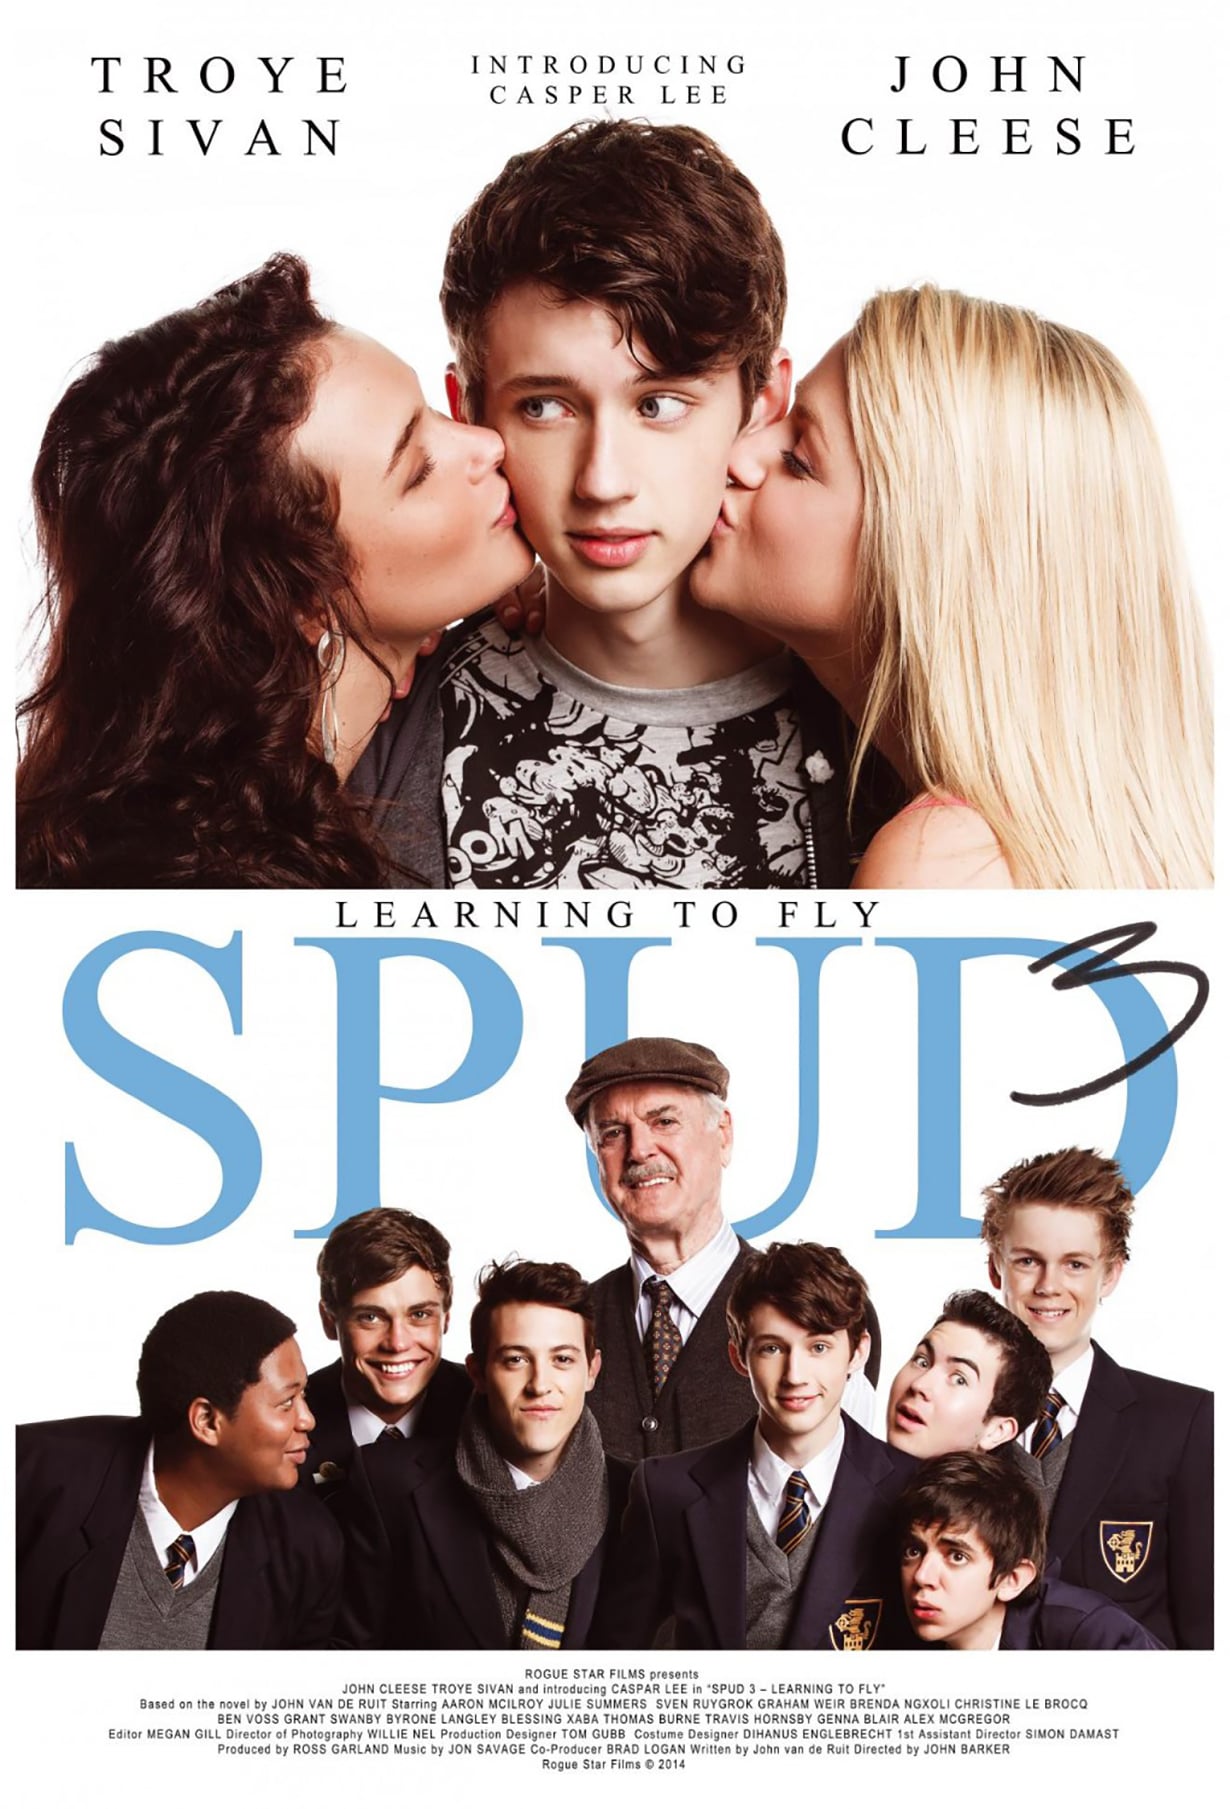 SPUD 3: LEARNING TO FLY, poster art, top: from left: Sonia Asgueira, Troye Sivan, Genna Blair,   bottom, from left:  Blessing Xaba, Byron Langley, Sven Ruygrok, John Cleese, Troye Sivan, Tom Burne, Travis Hornsby, Caspar Lee, 2014. Nu Metro Films/Courtesy Everett Collection